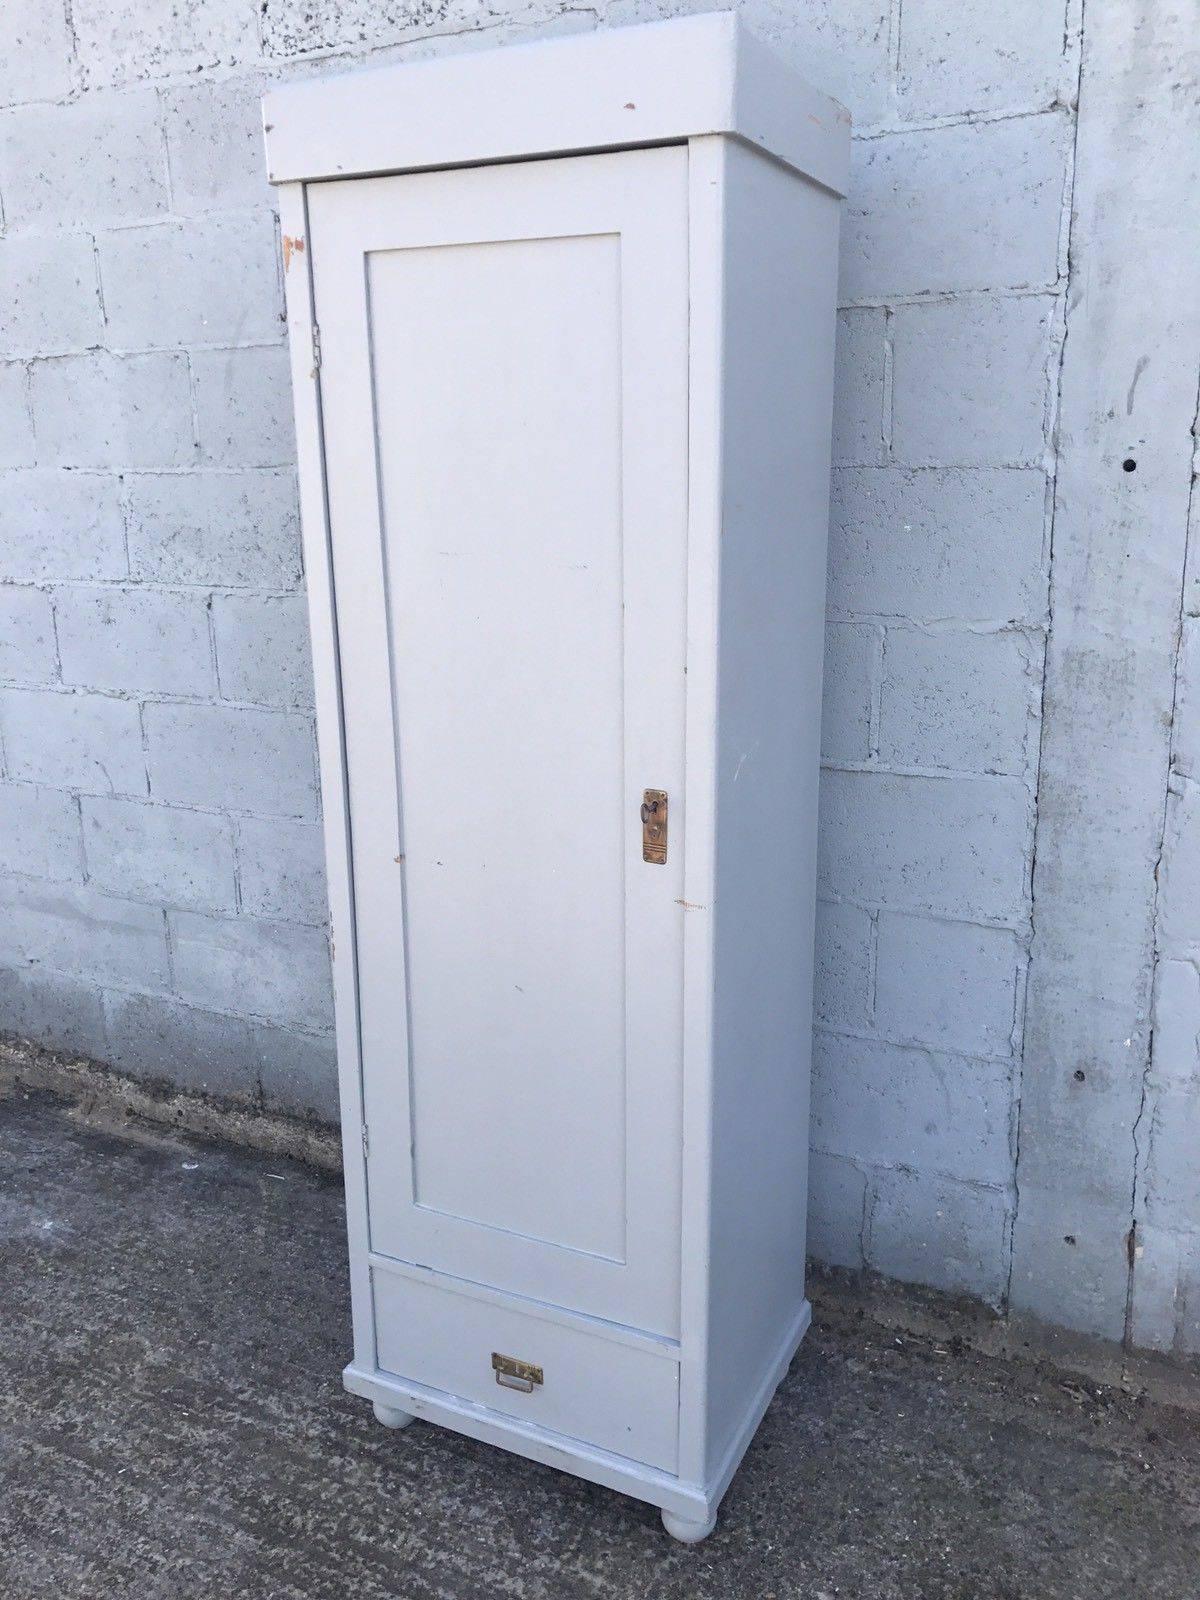 This is a beautiful French larder/cupboard or wardrobe.

It's been painted in grey color, slightly distressed.

Single carved door opens up to good storage. Can be fitted with shelves or hanging rails as an extra, if needed.

Dimensions- 62cm